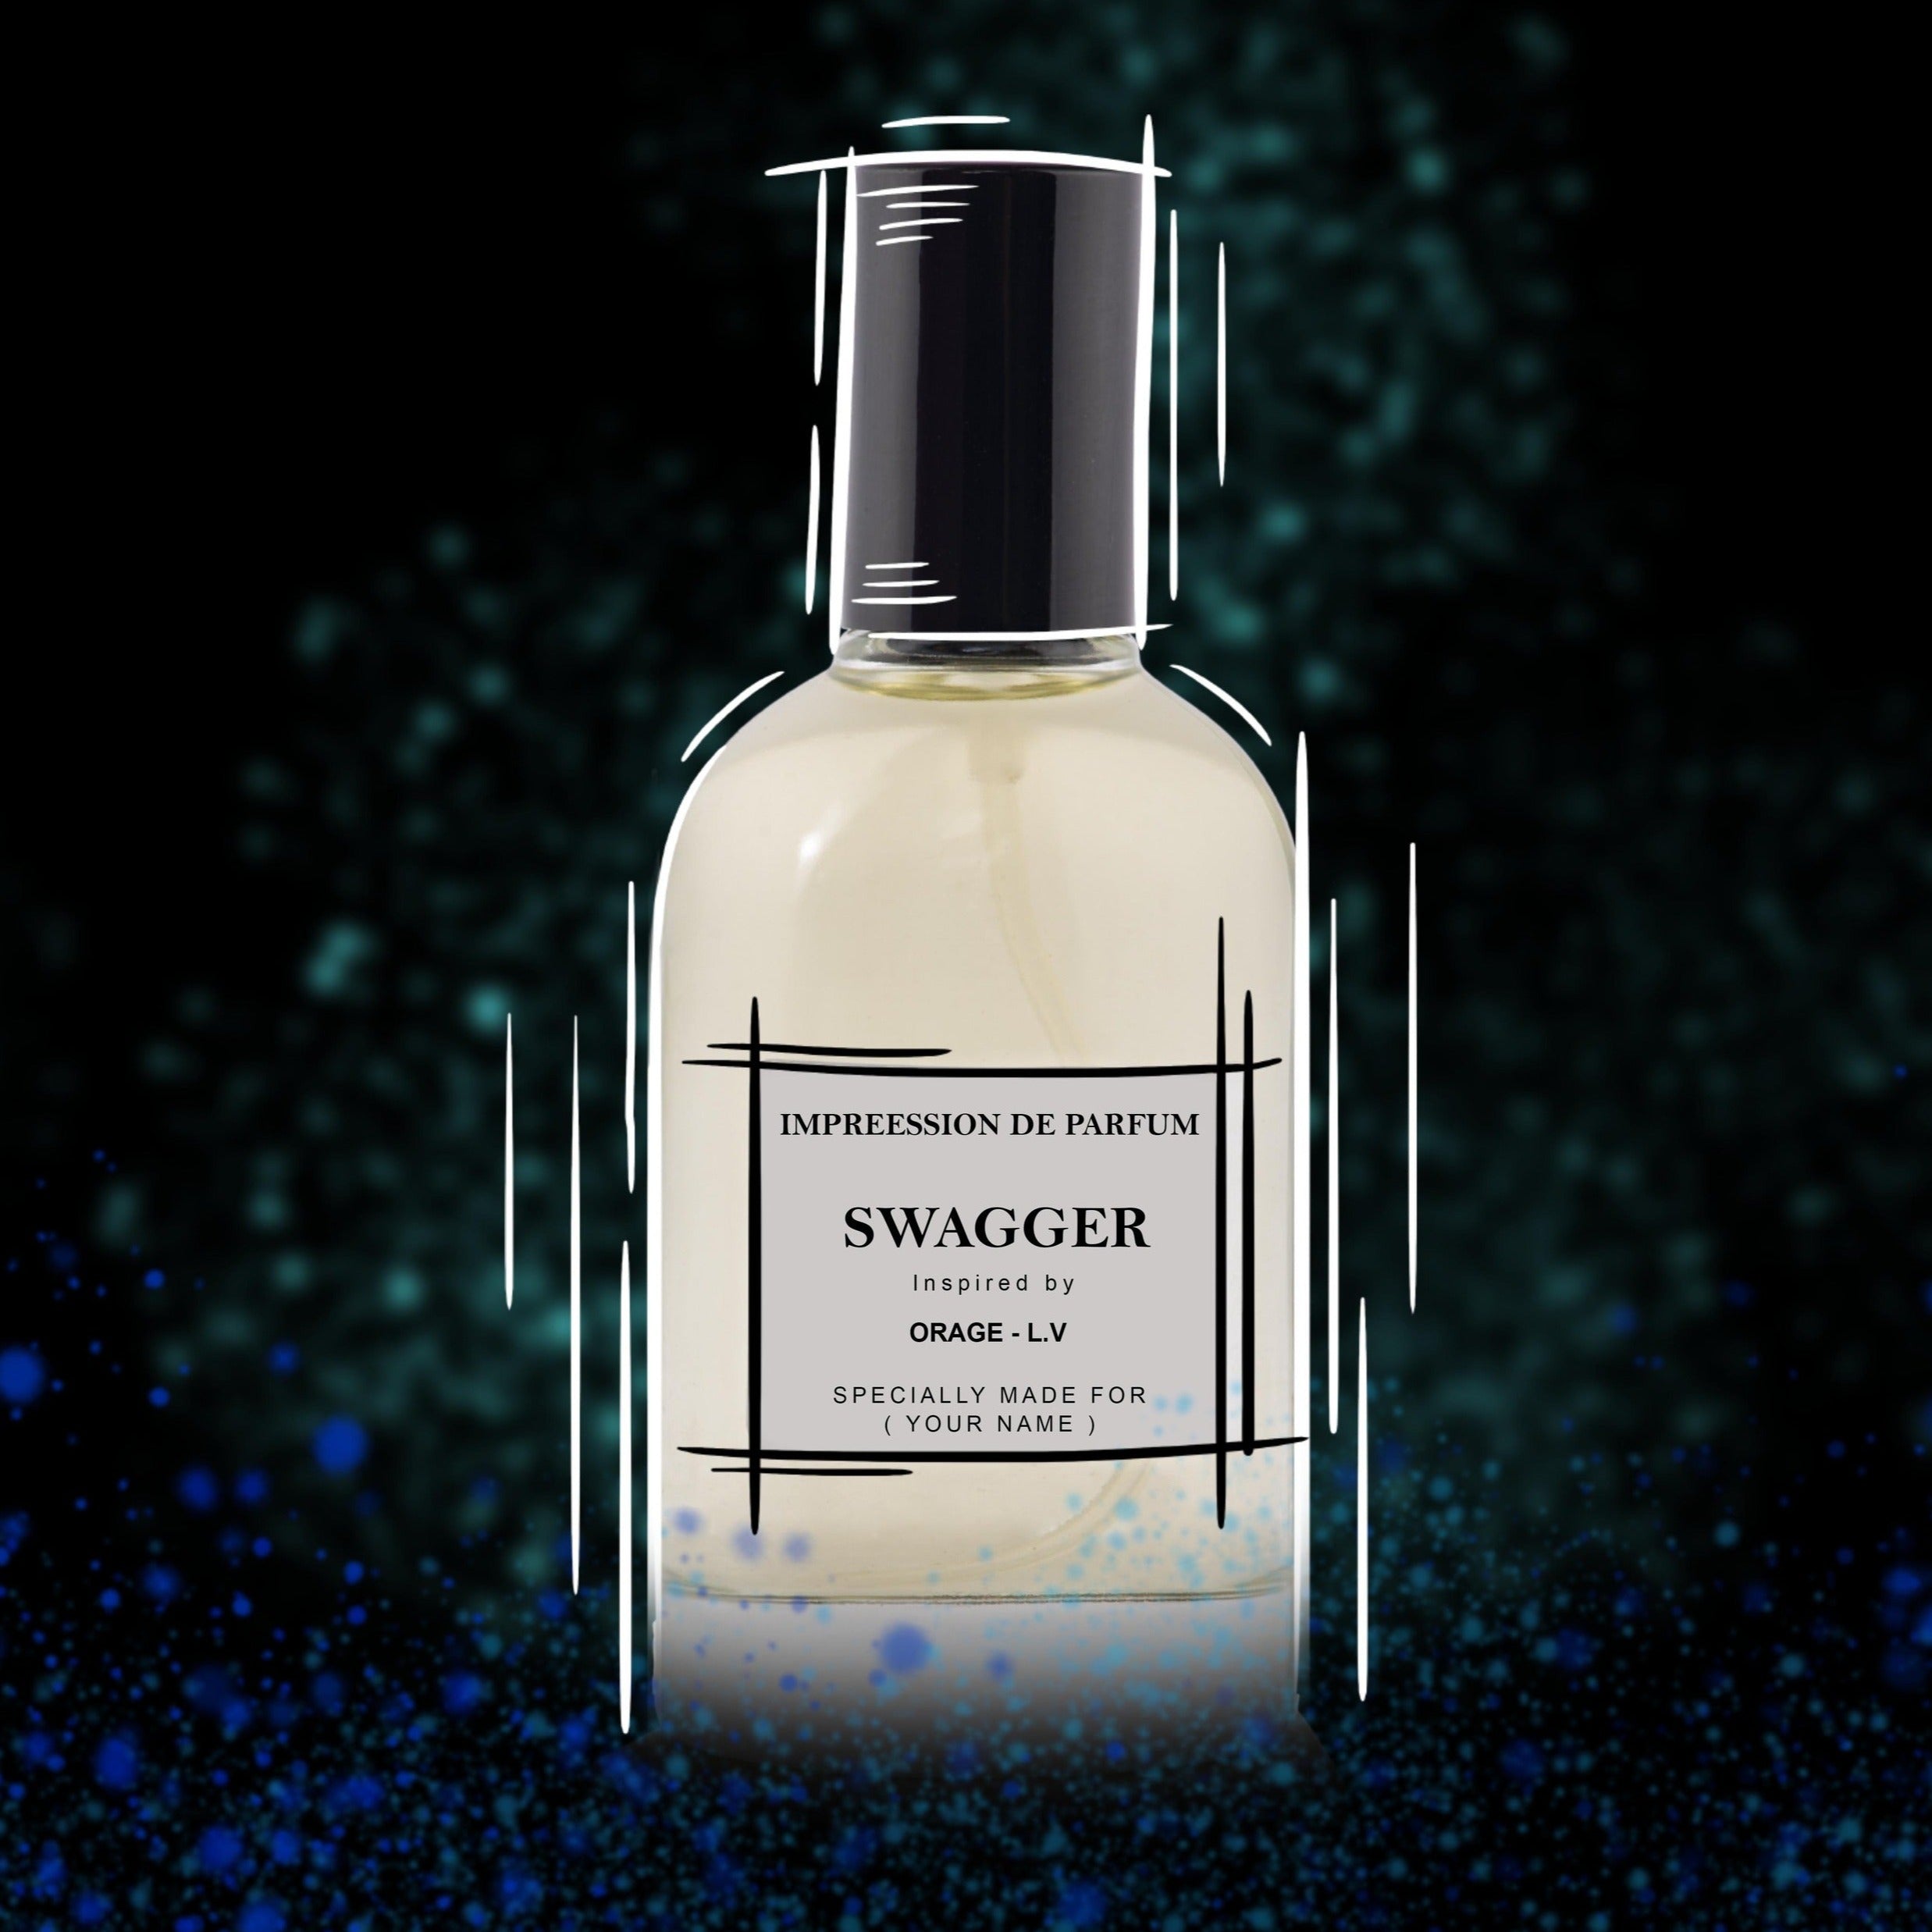 Swagger for him. Inspired by Orage L-V. – Impressiondeparfum